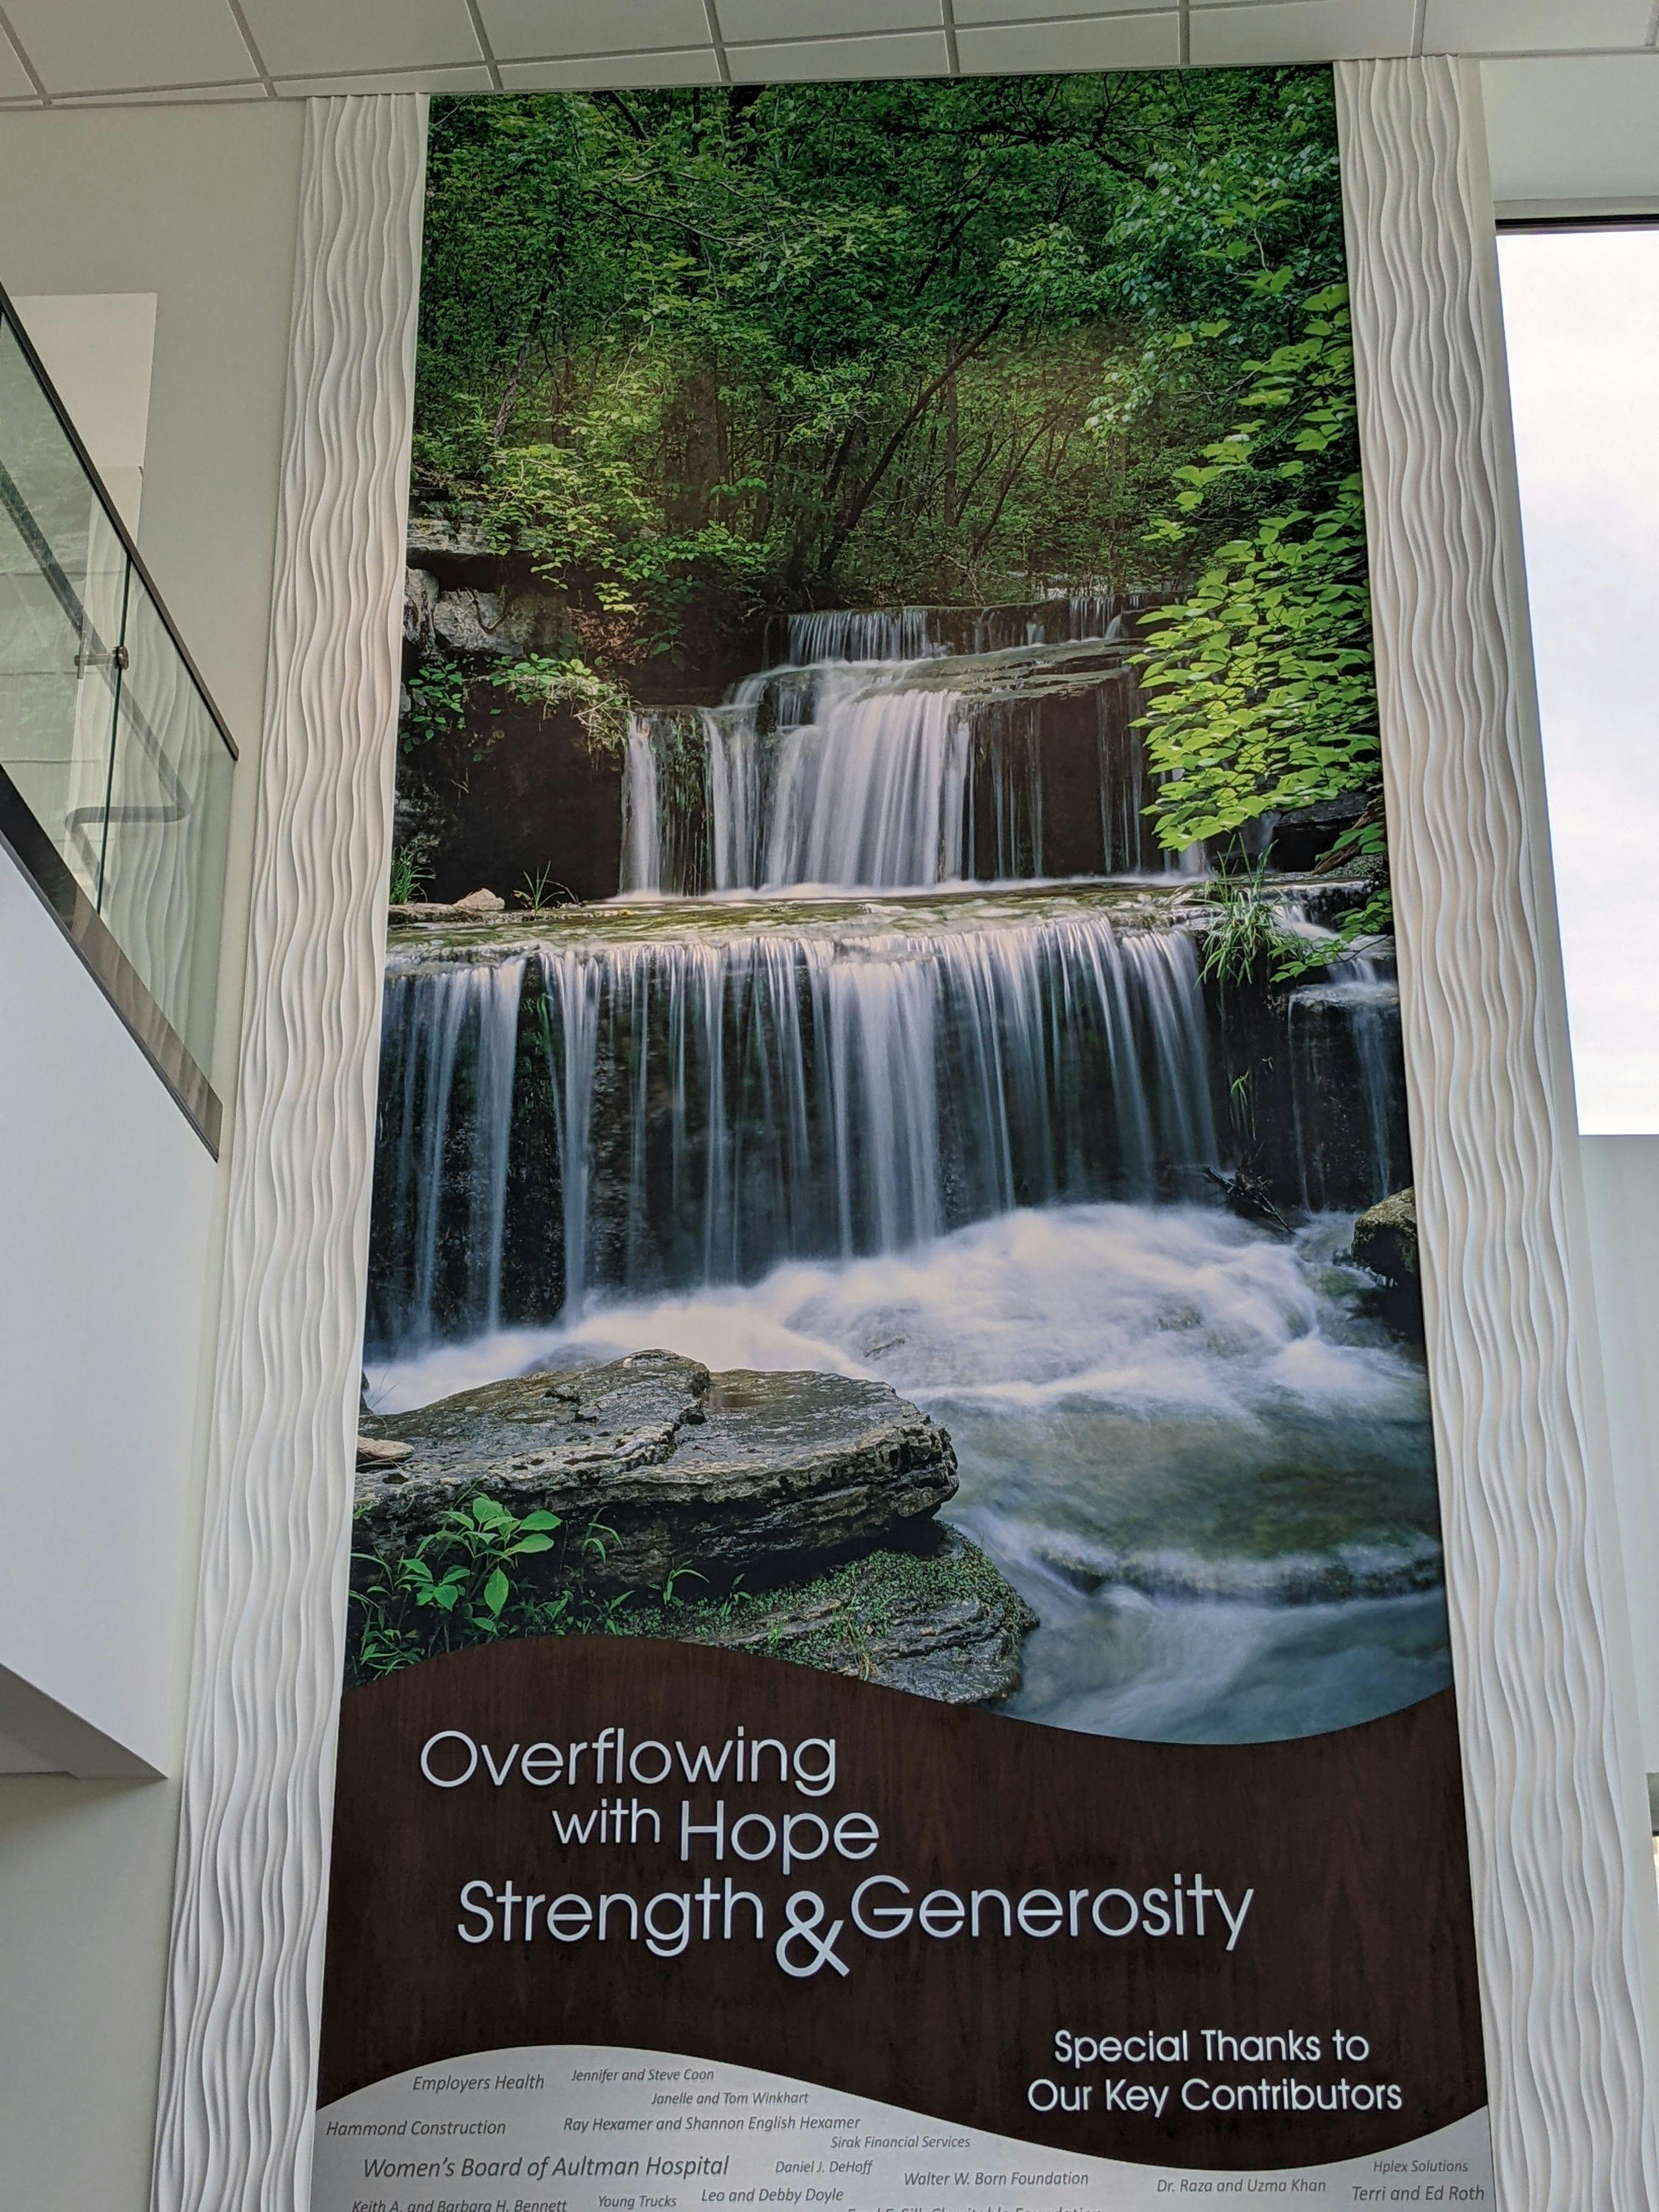 Jane Biehl said that the waterfall artwork adds beauty to her cancer treatment center.